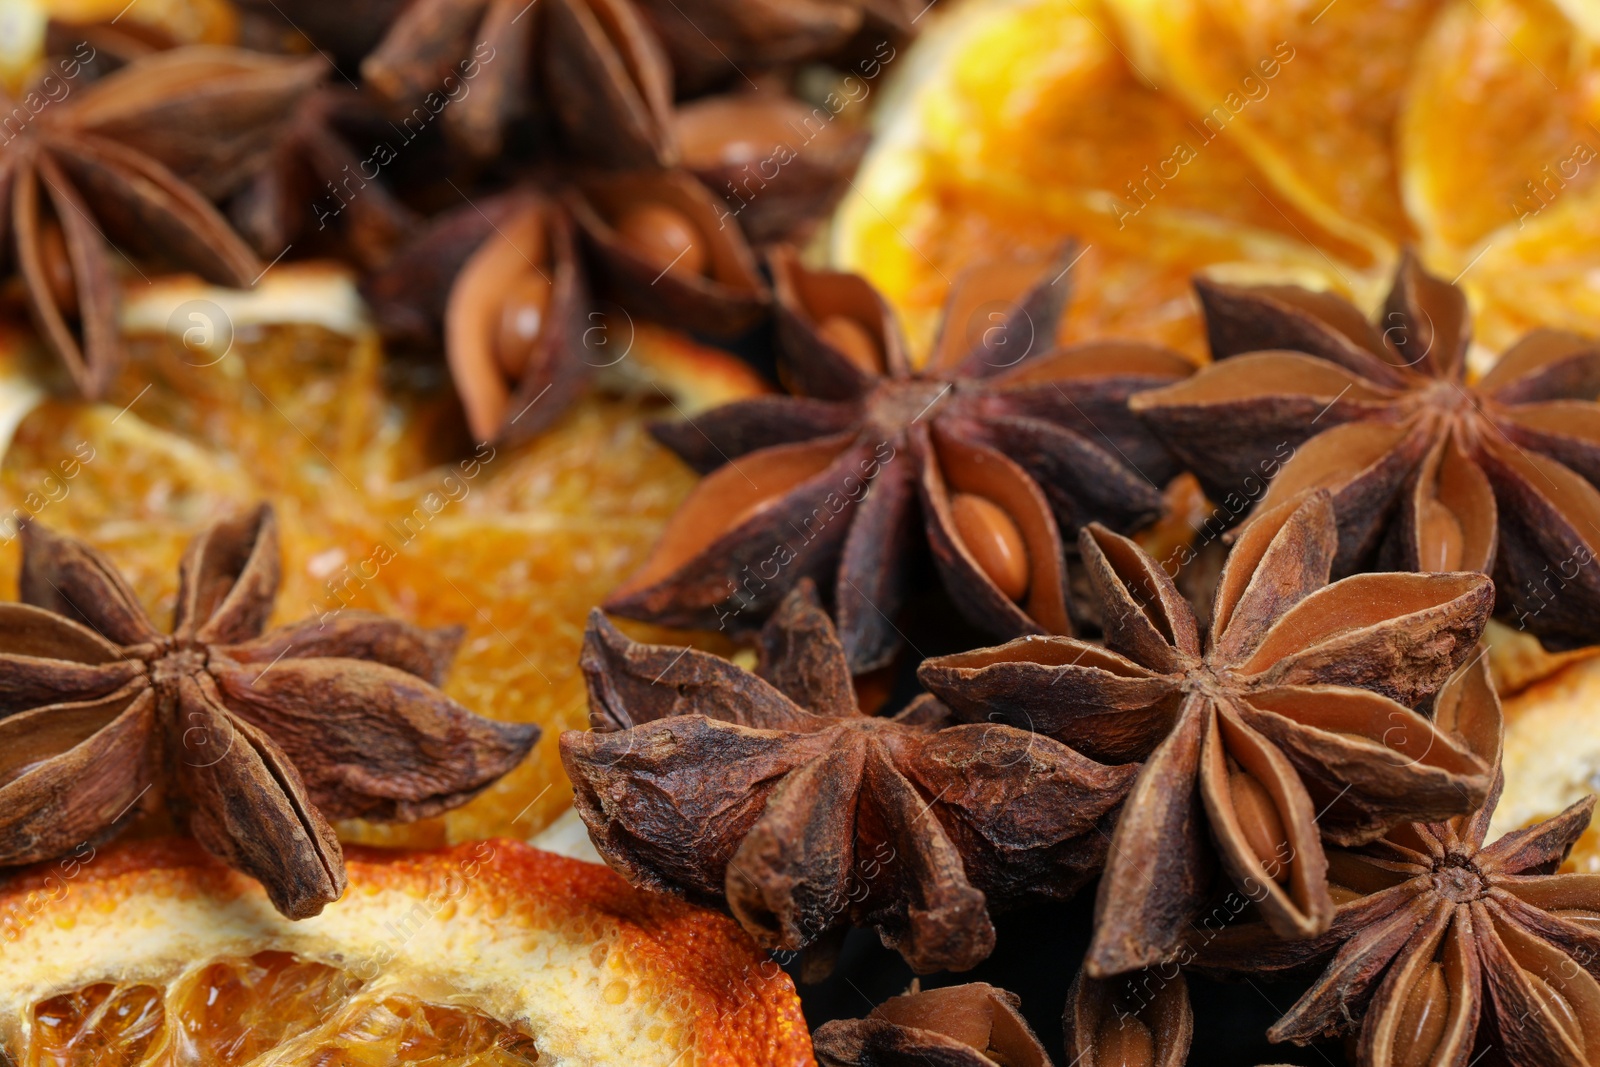 Photo of Dry orange slices and anise stars as background, closeup